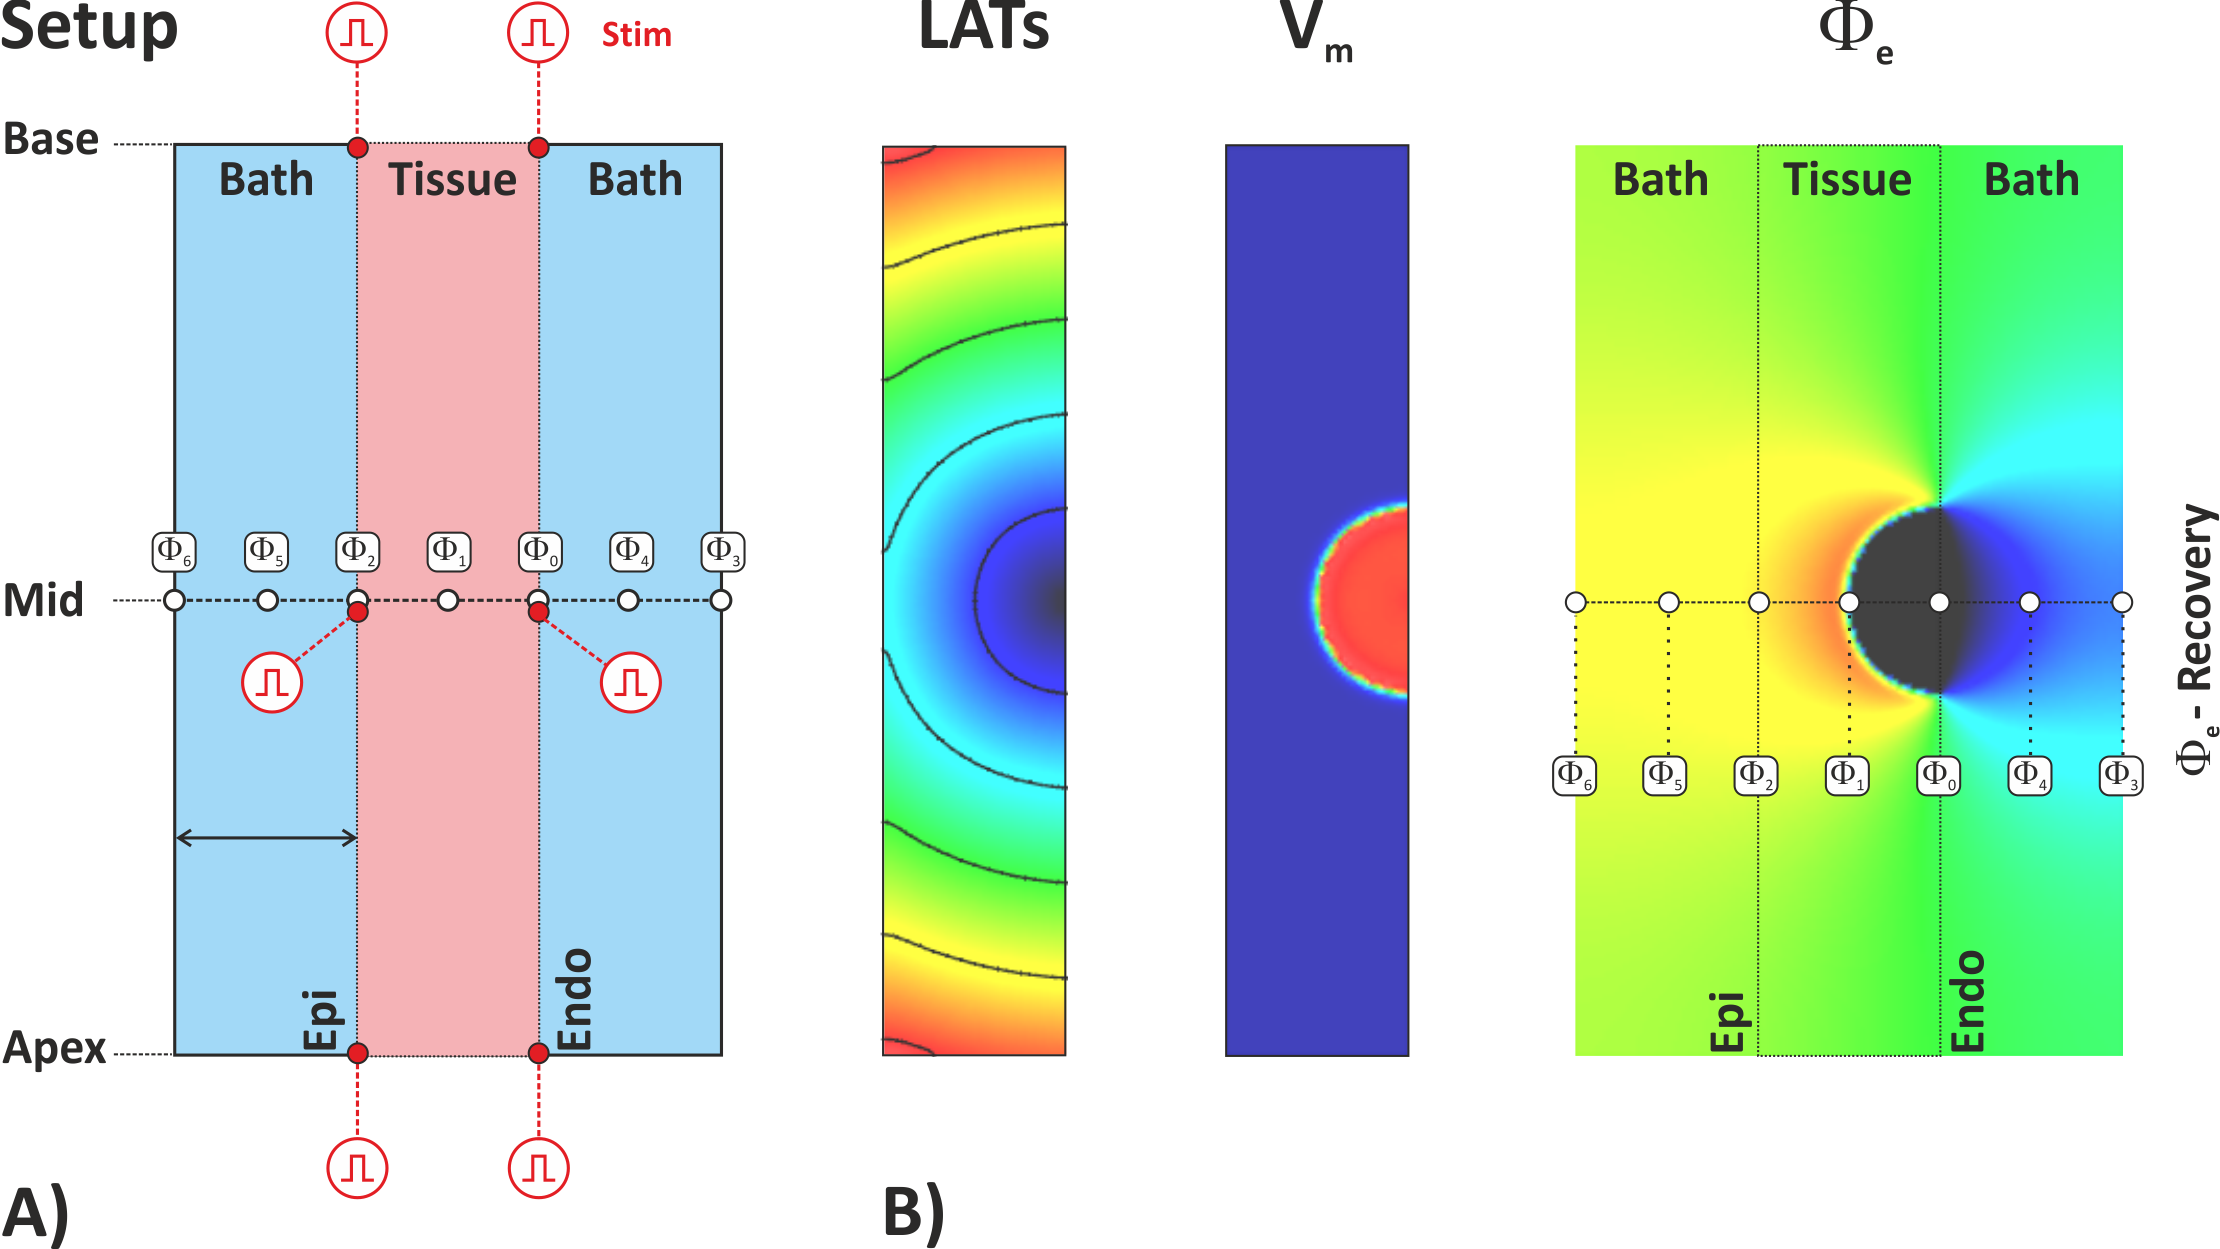 Computing extracellular potentials and ECGs. A) Setup B) Visualization Extracellular potentials \phi_{\mathrm 0} - \phi_{\mathrm 6} are recovered at the indicated locations along the apico-basal centerline to be compared with bidomain-based potentials. Three recovery sites are located inside the tissue, one in the midmyocardium, and one at endocardial and epicardial surfaces, respectively. In the presence of a bath (i.e., bath>0) extra recovery sites are located at the surface of the bath and in the center of the bath for both bath compartments interfacing with endocardial and epicardial surfaces.